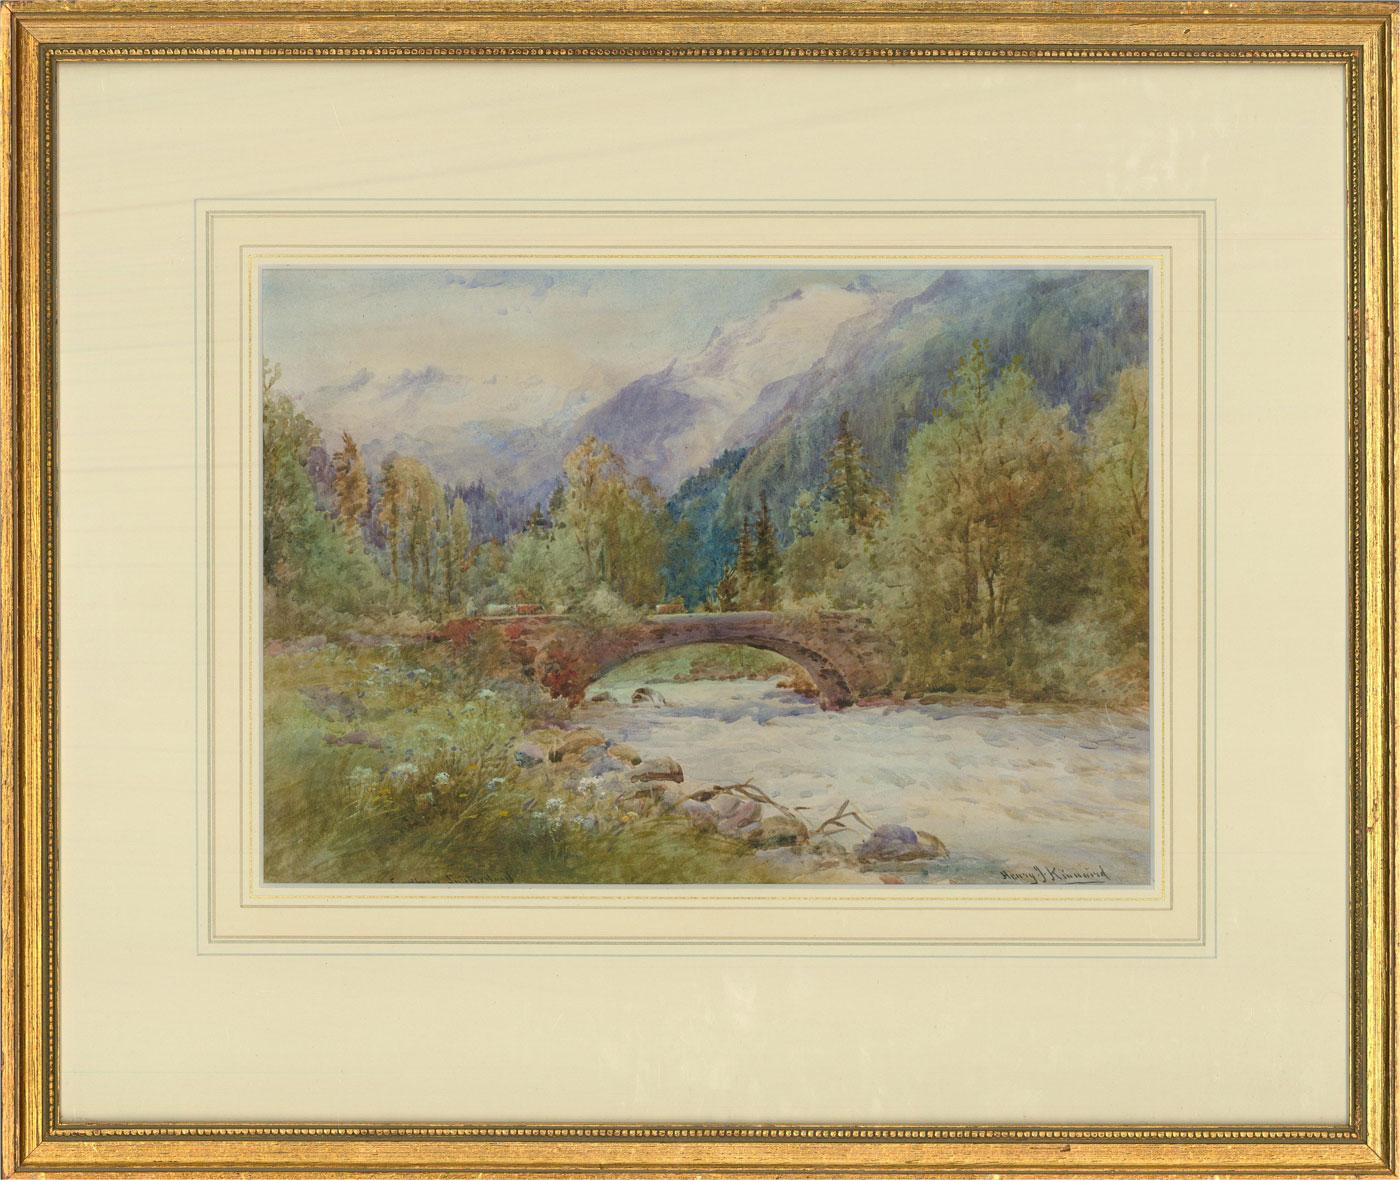 A fine watercolour painting with body colour details by the British artist Henry John Kinnaird. The scene depicts a Swiss river landscape view with snow covered mountains in the distance. The colour palette and overall balance of the composition